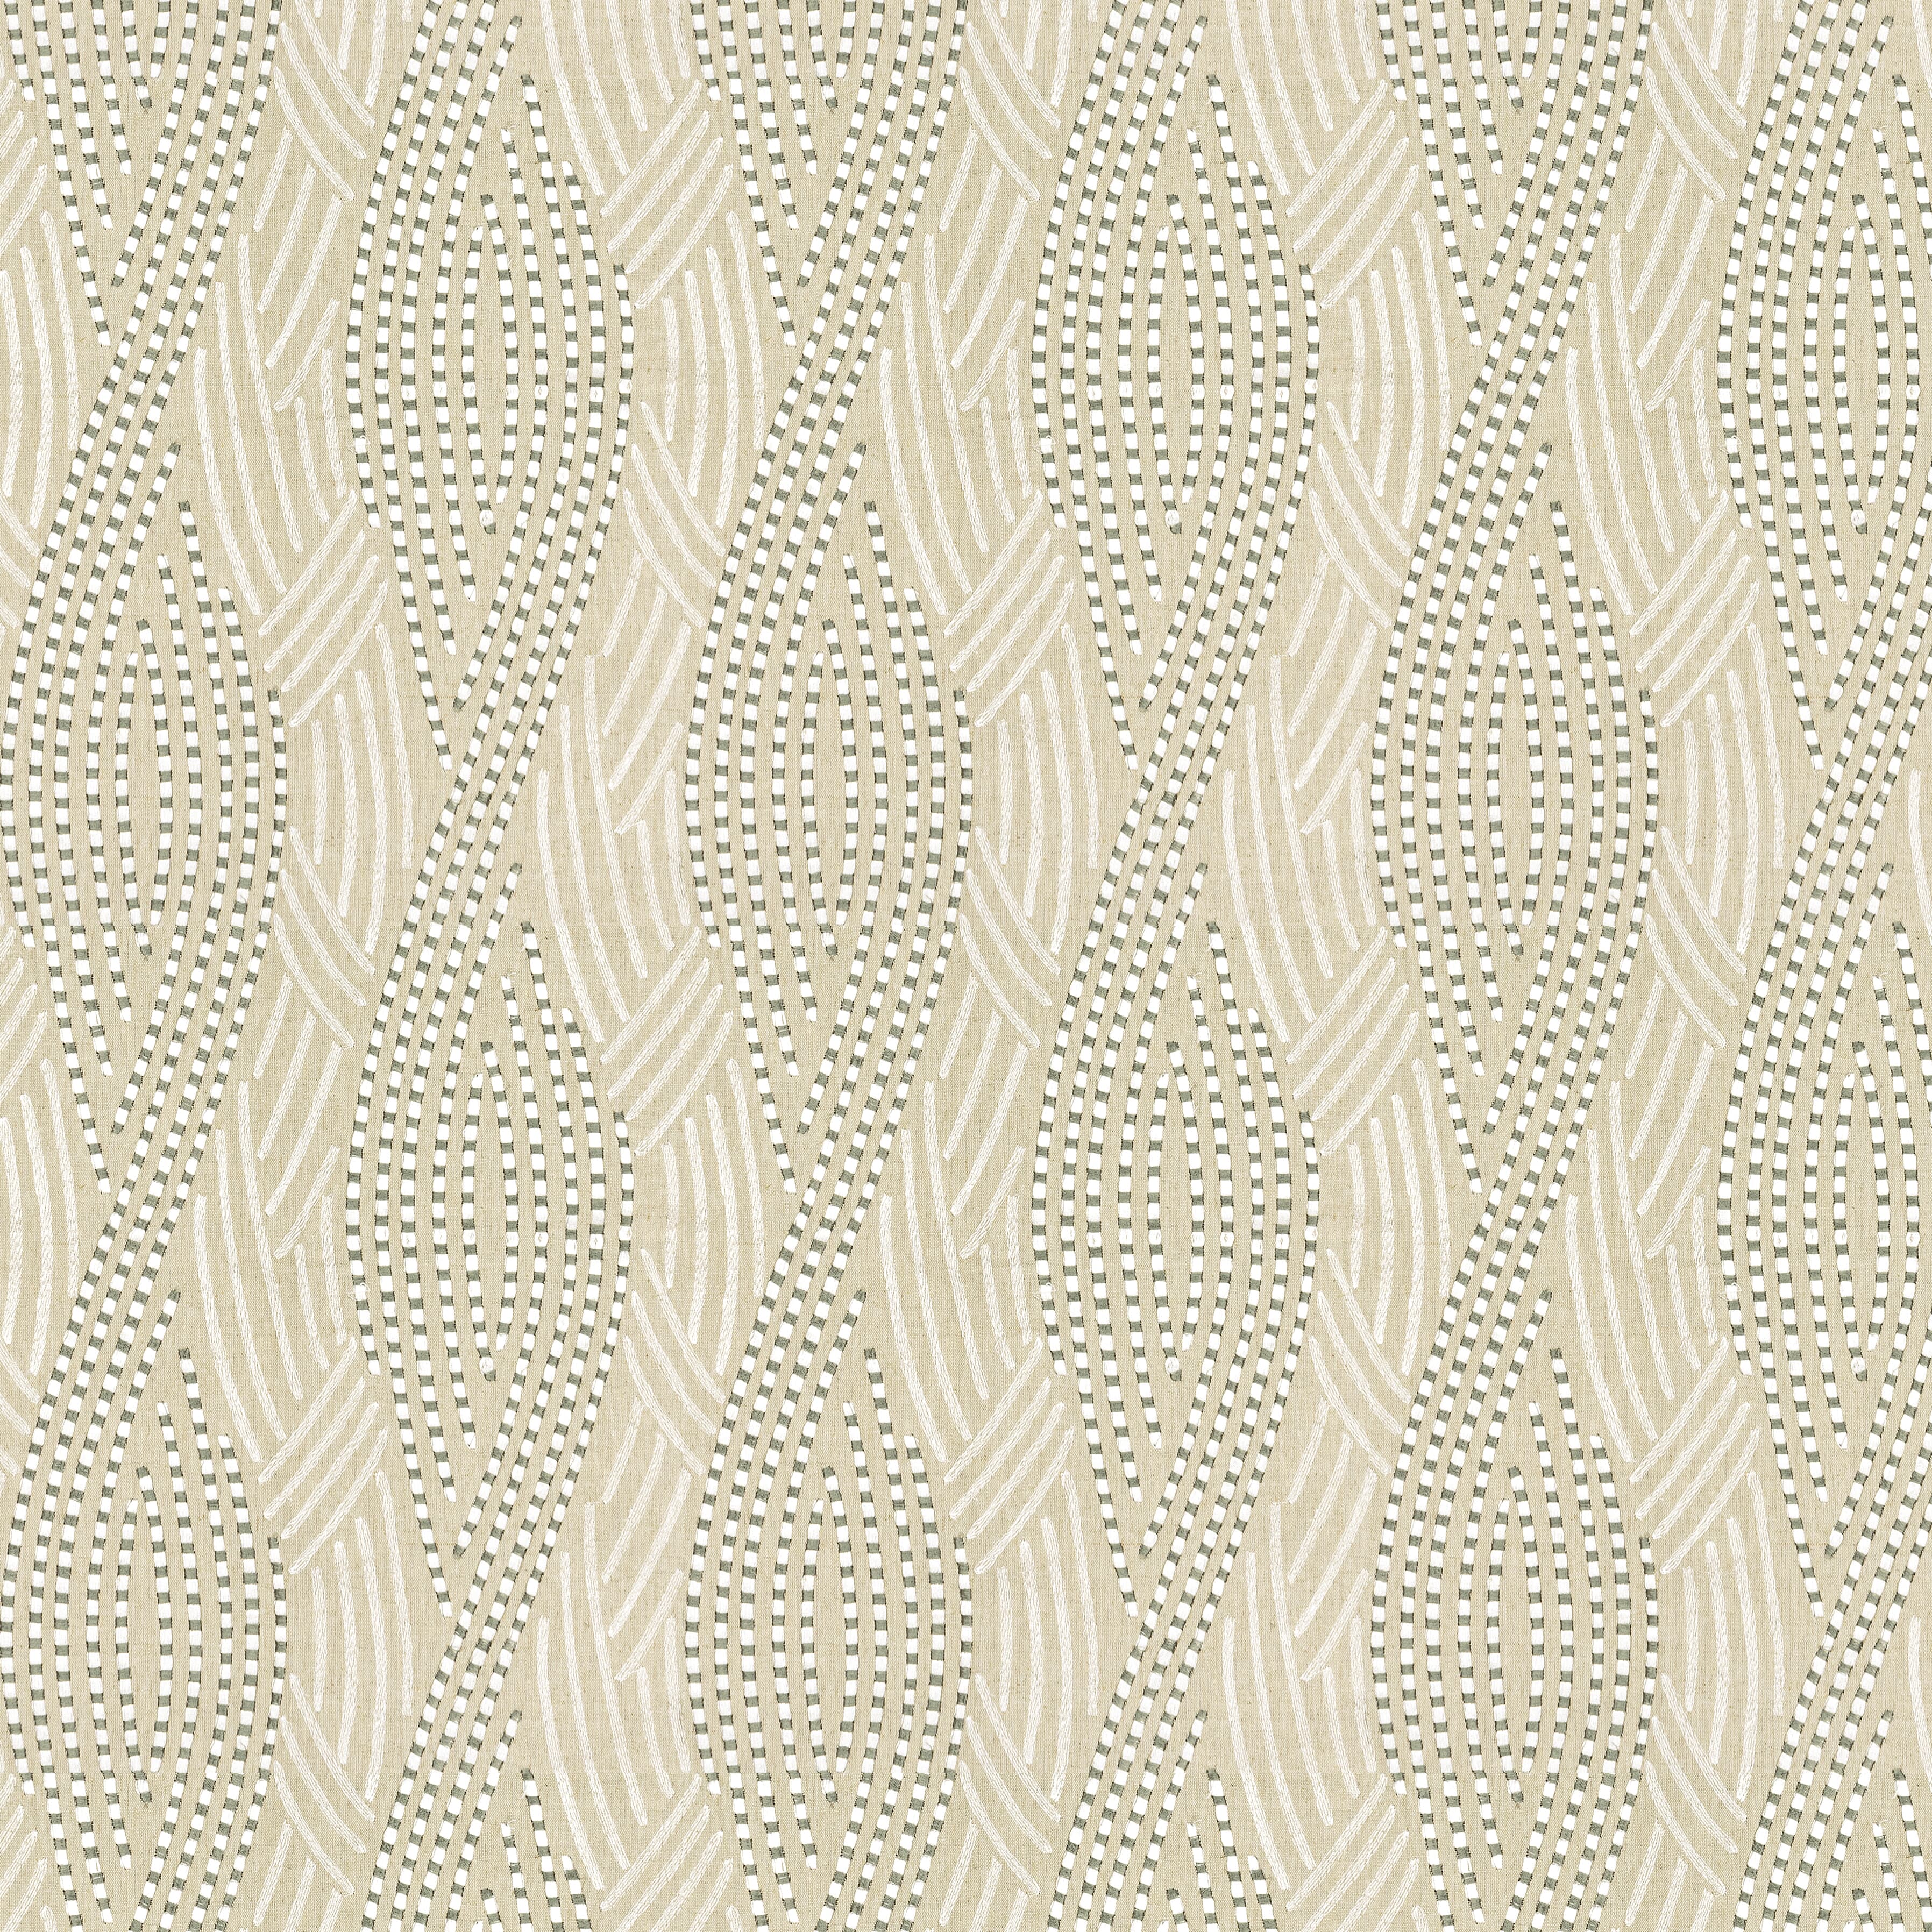 Eclair 2 Linen by Stout Fabric